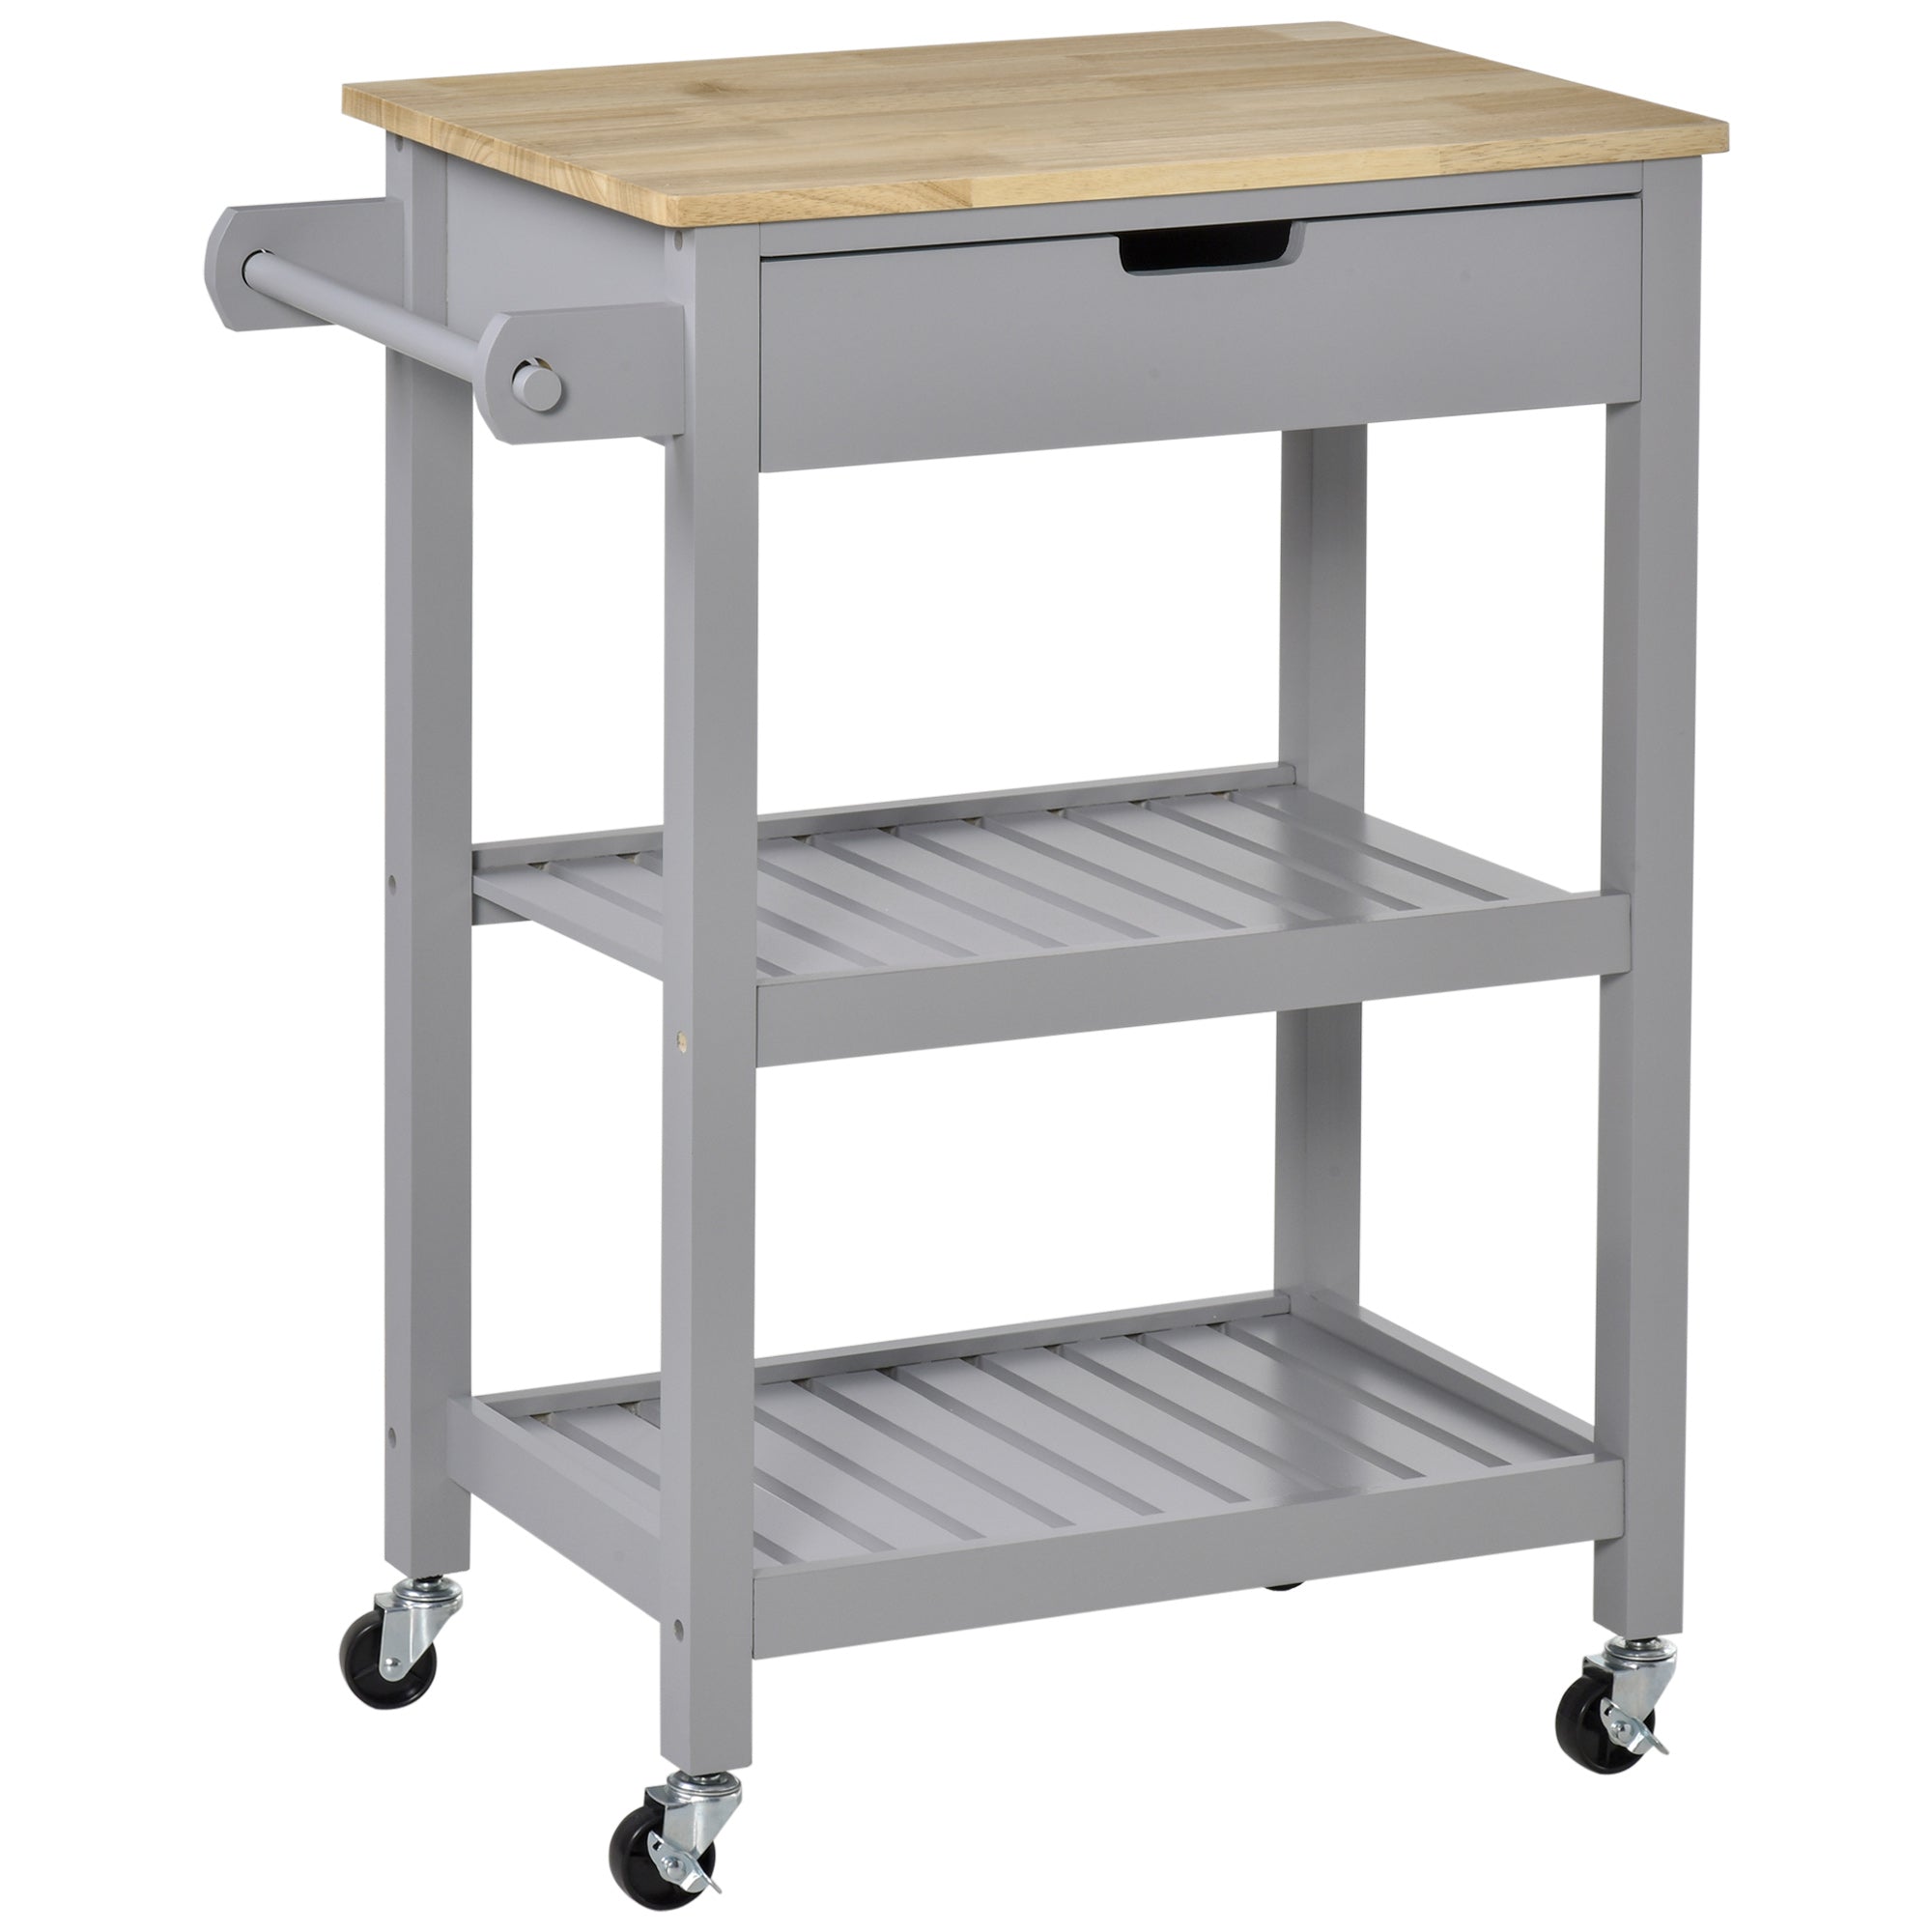 Kitchen Trolley Utility Cart on Wheels with Rubberwood Worktop, Towel Rack, Storage Shelves & Drawer for Dining Room, Grey-0